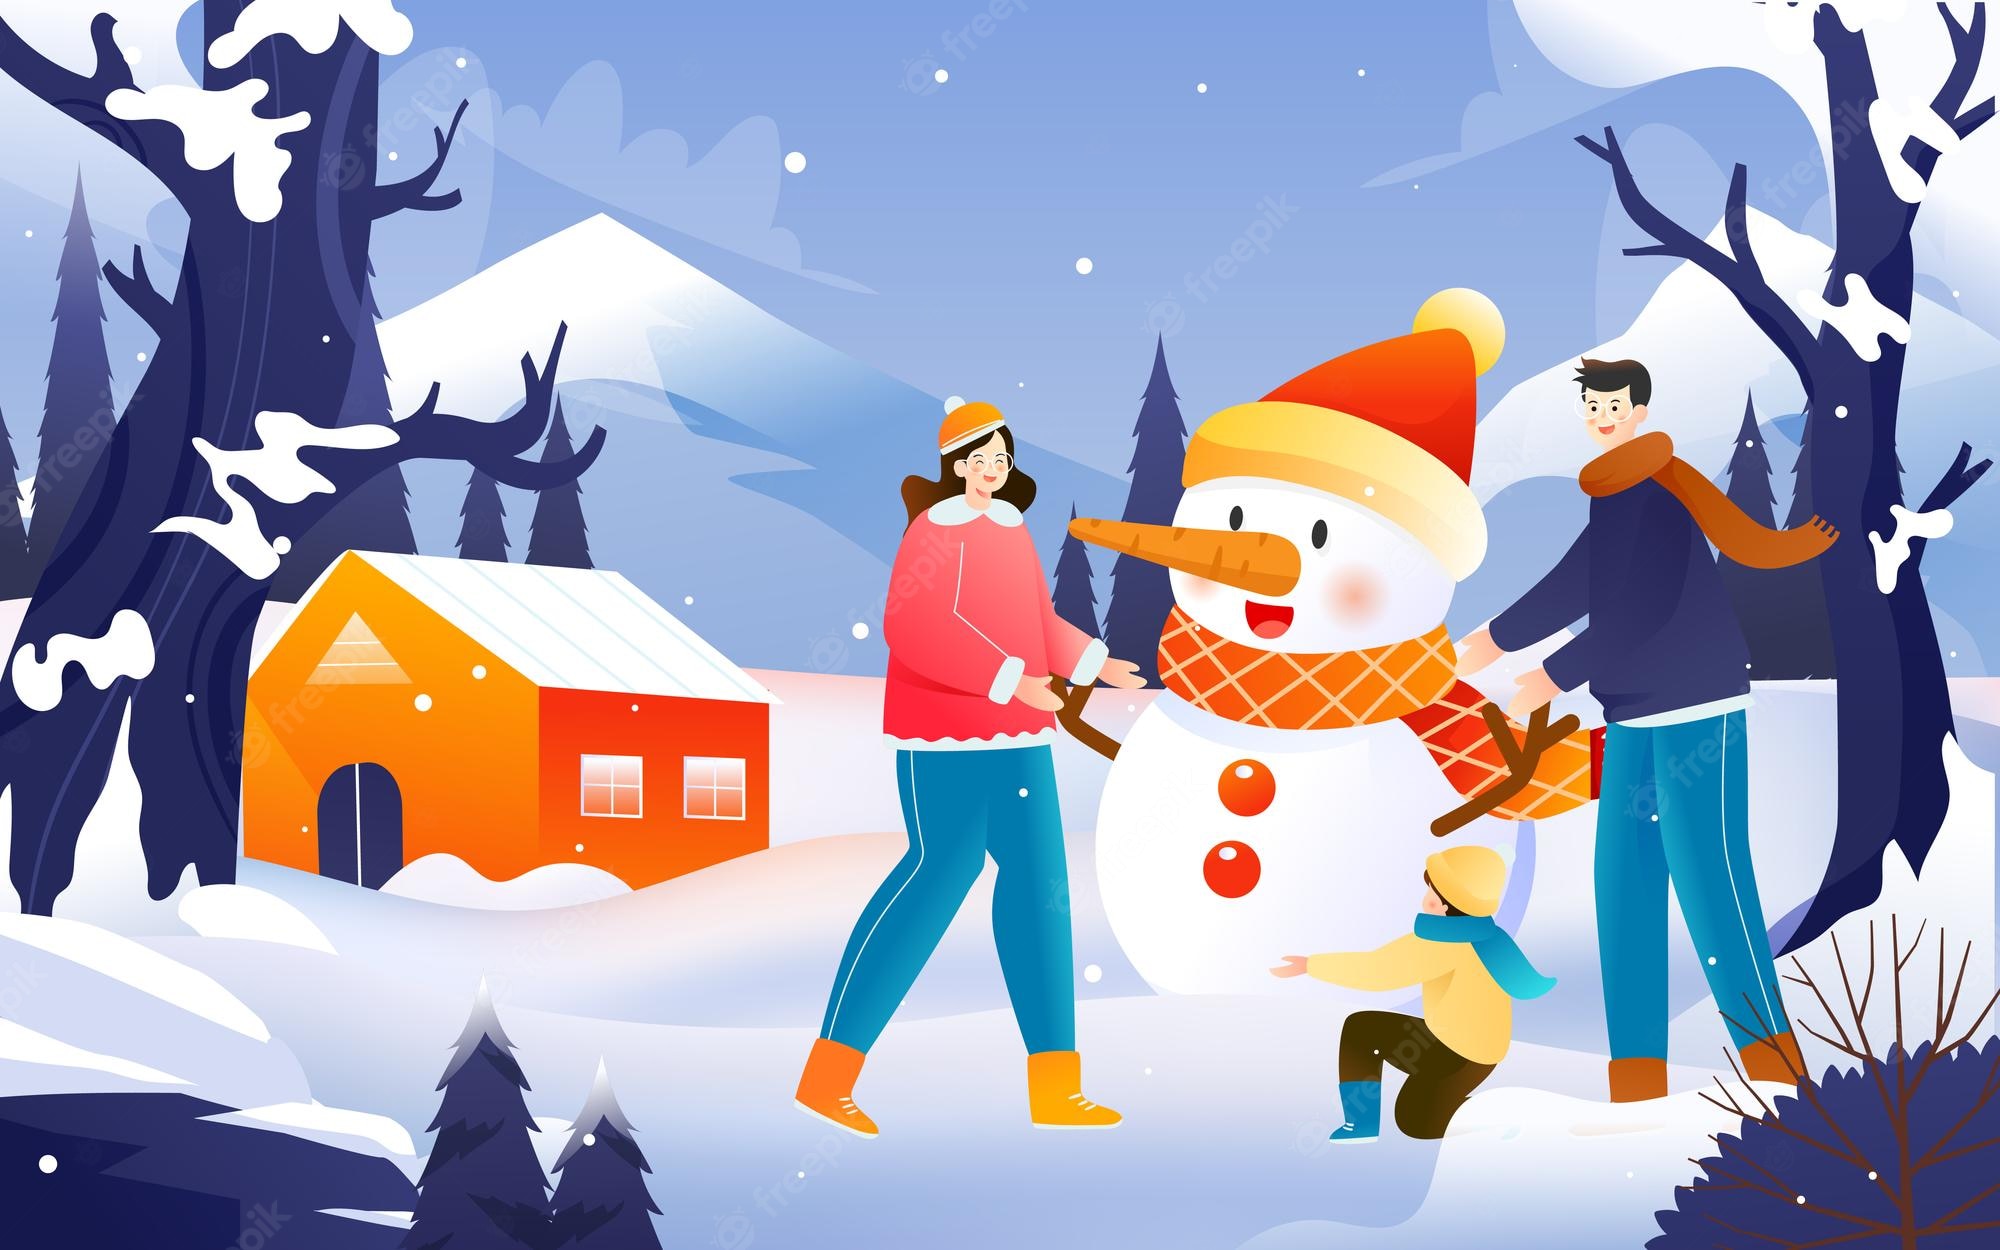 Premium Vector. Family making snowman outdoors in winter snowy weather with house and trees in the background